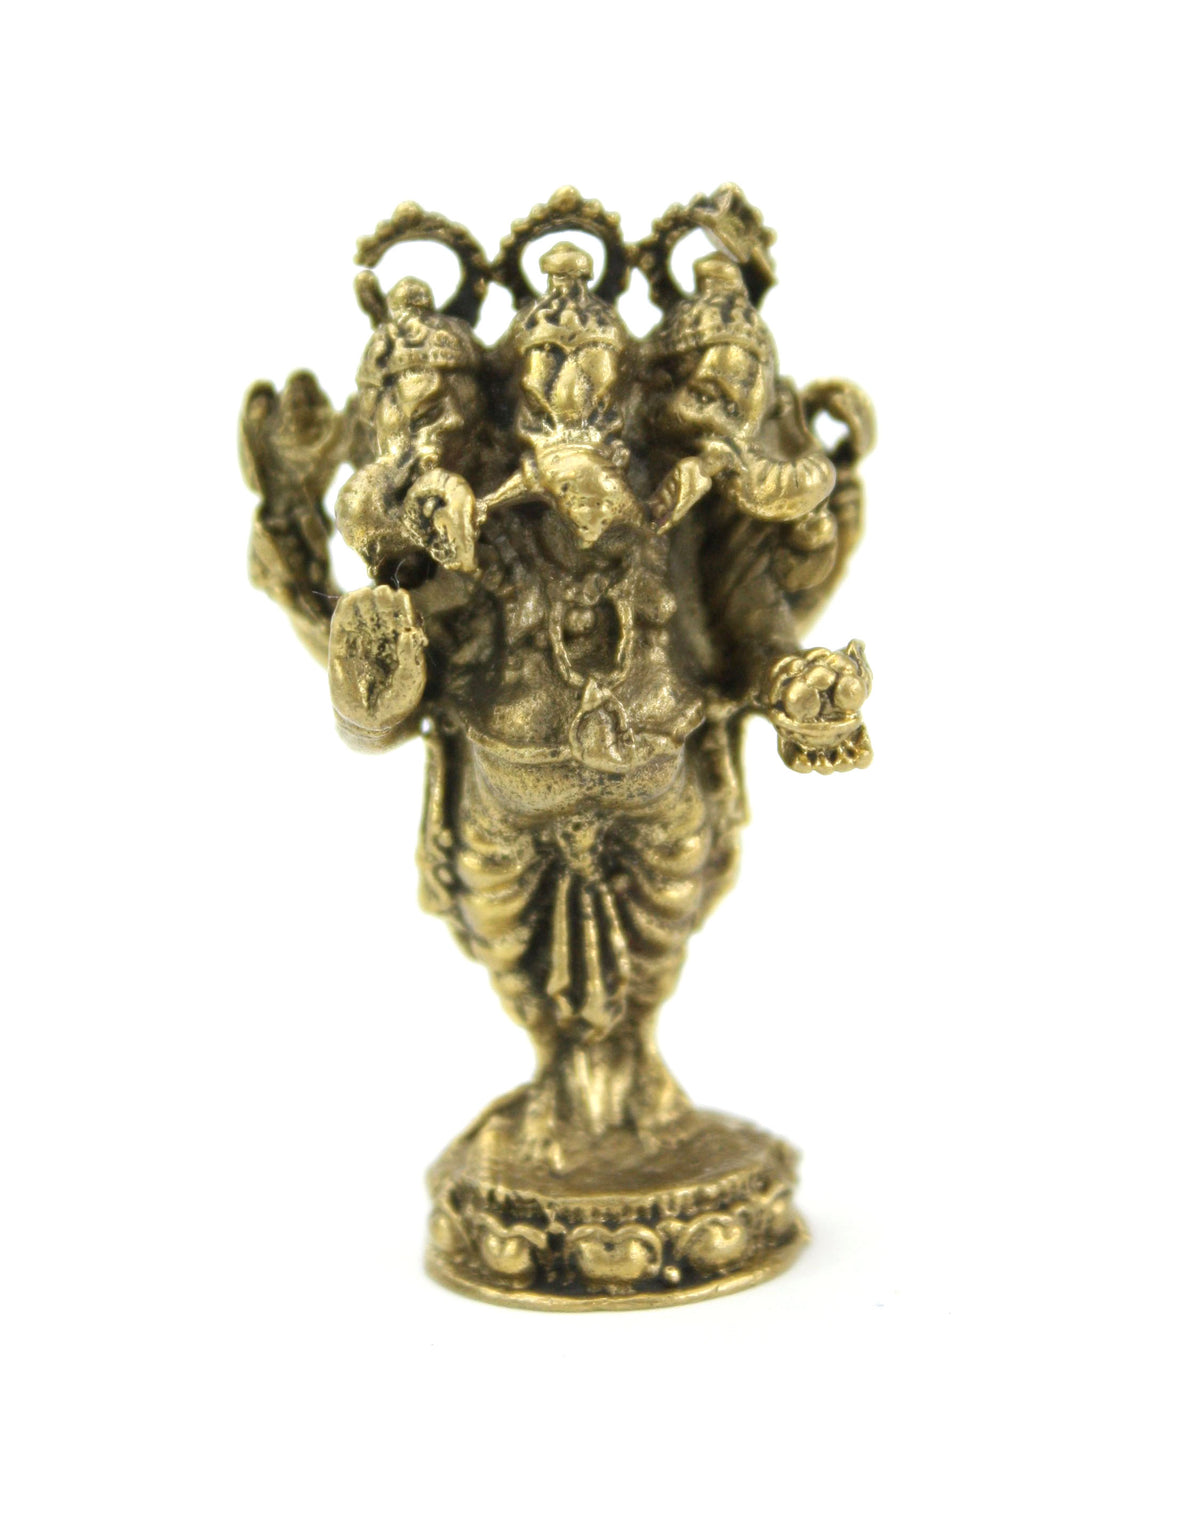 Authentic Brass Ganesh Amulets - Choice of designs